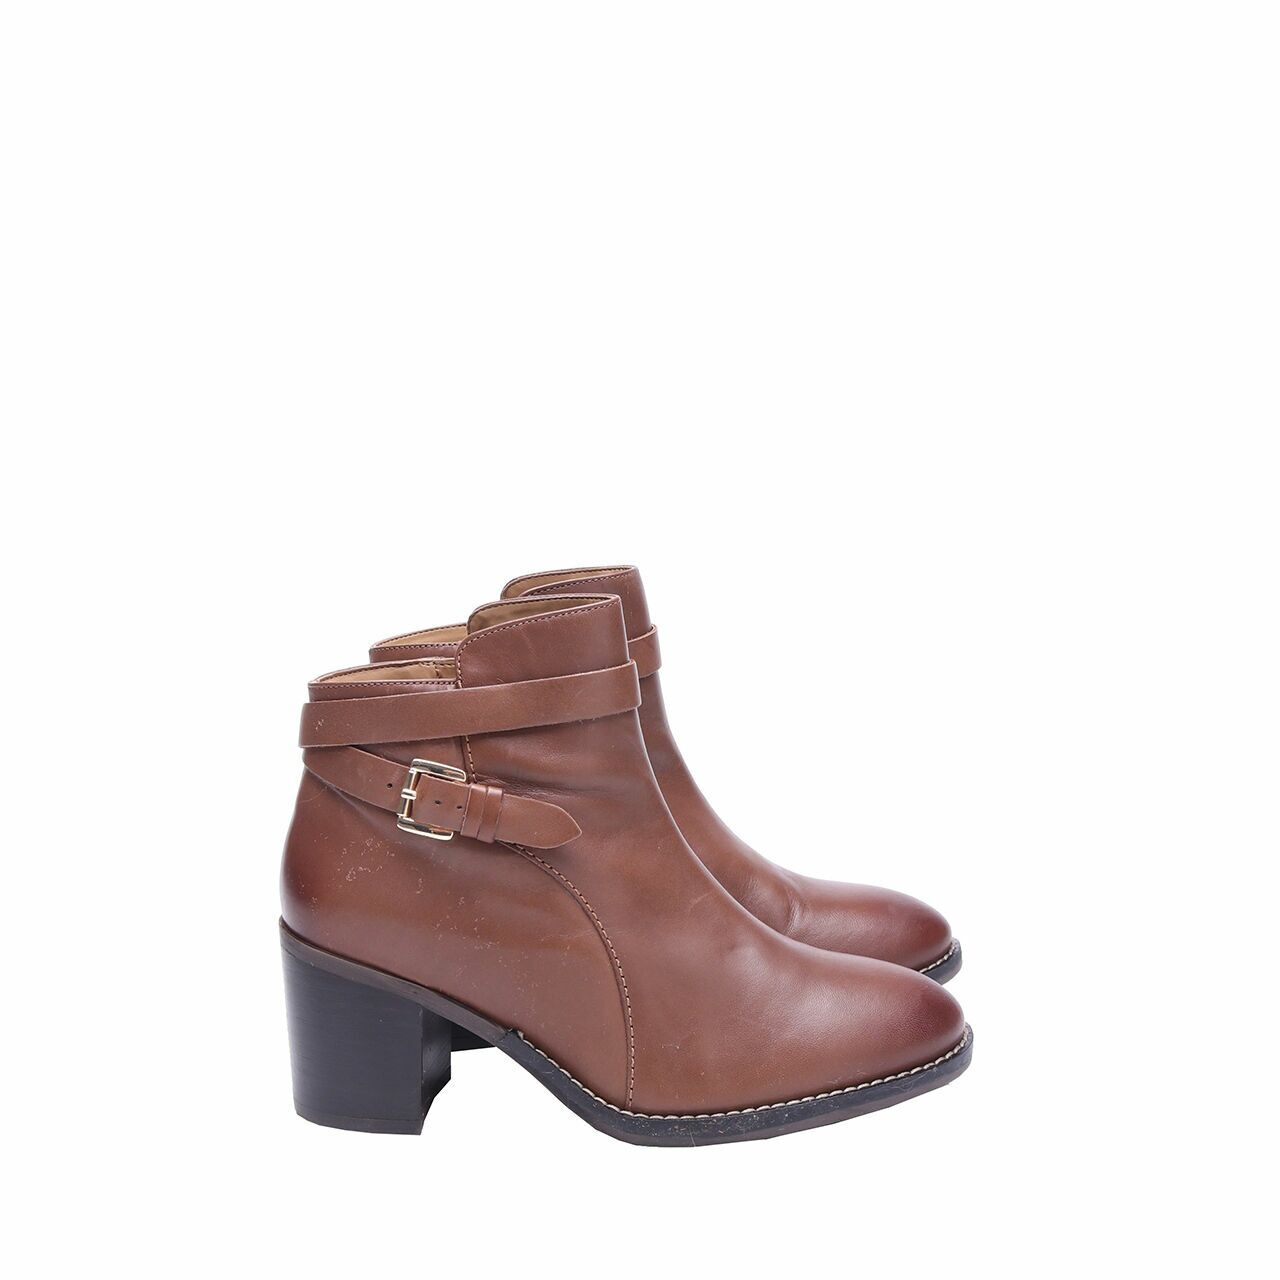 Hush Puppies Brown Boots